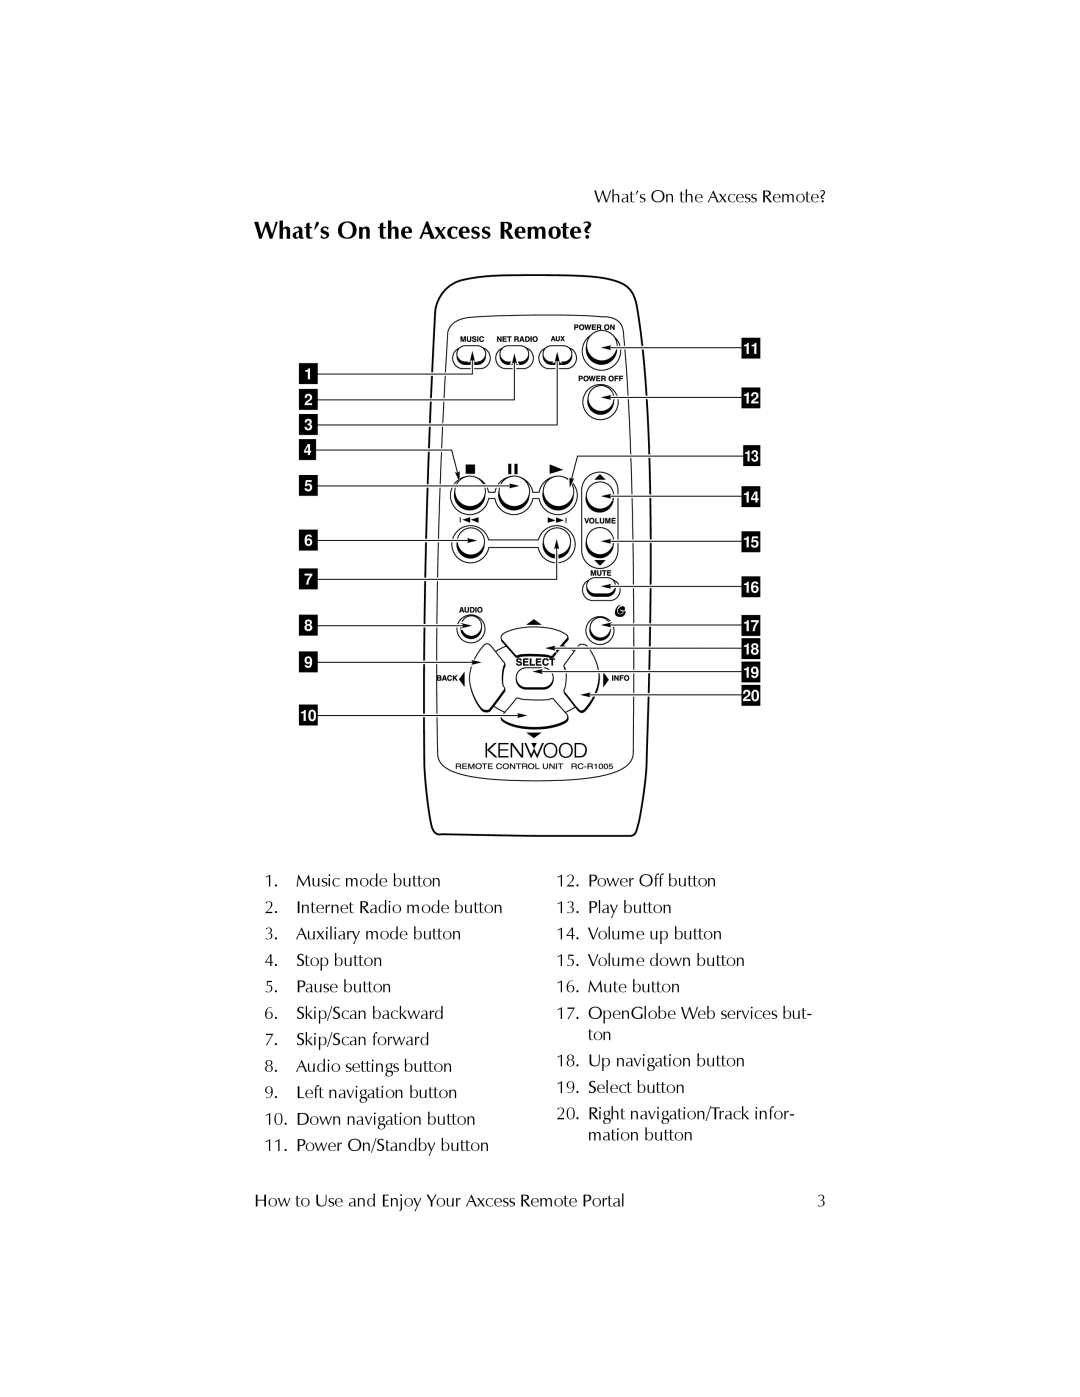 Kenwood REMOTE PORTAL AXCESS manual What’s On the Axcess Remote? 